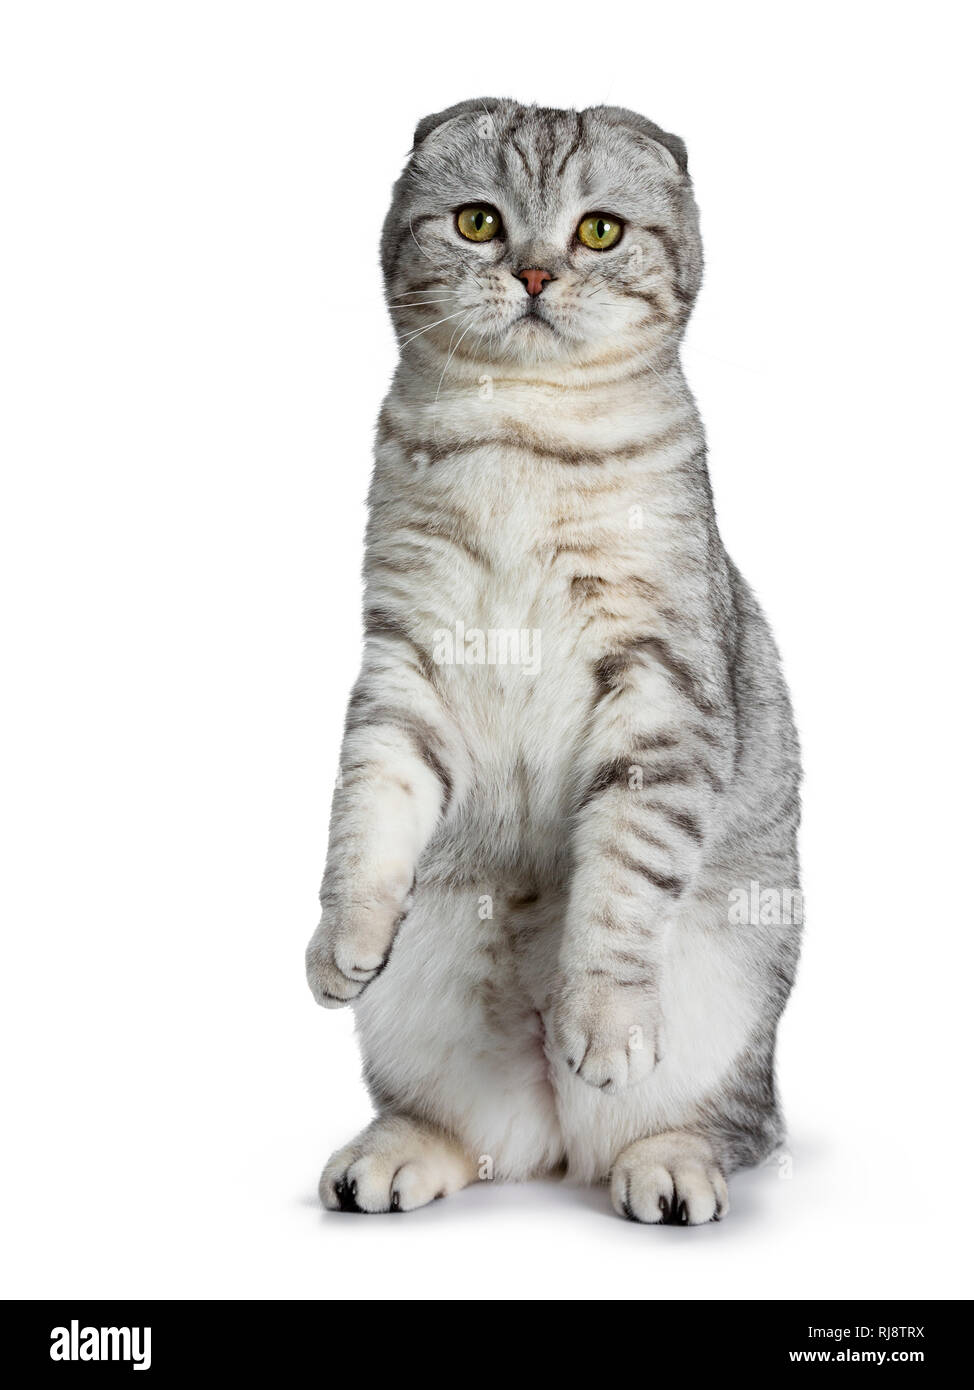 Cute Young Silver Tabby Scottish Fold Cat Kitten Sitting Up On Hind Paws Looking At Camera With Yellow Eyes Isolated On A White Background Stock Photo Alamy